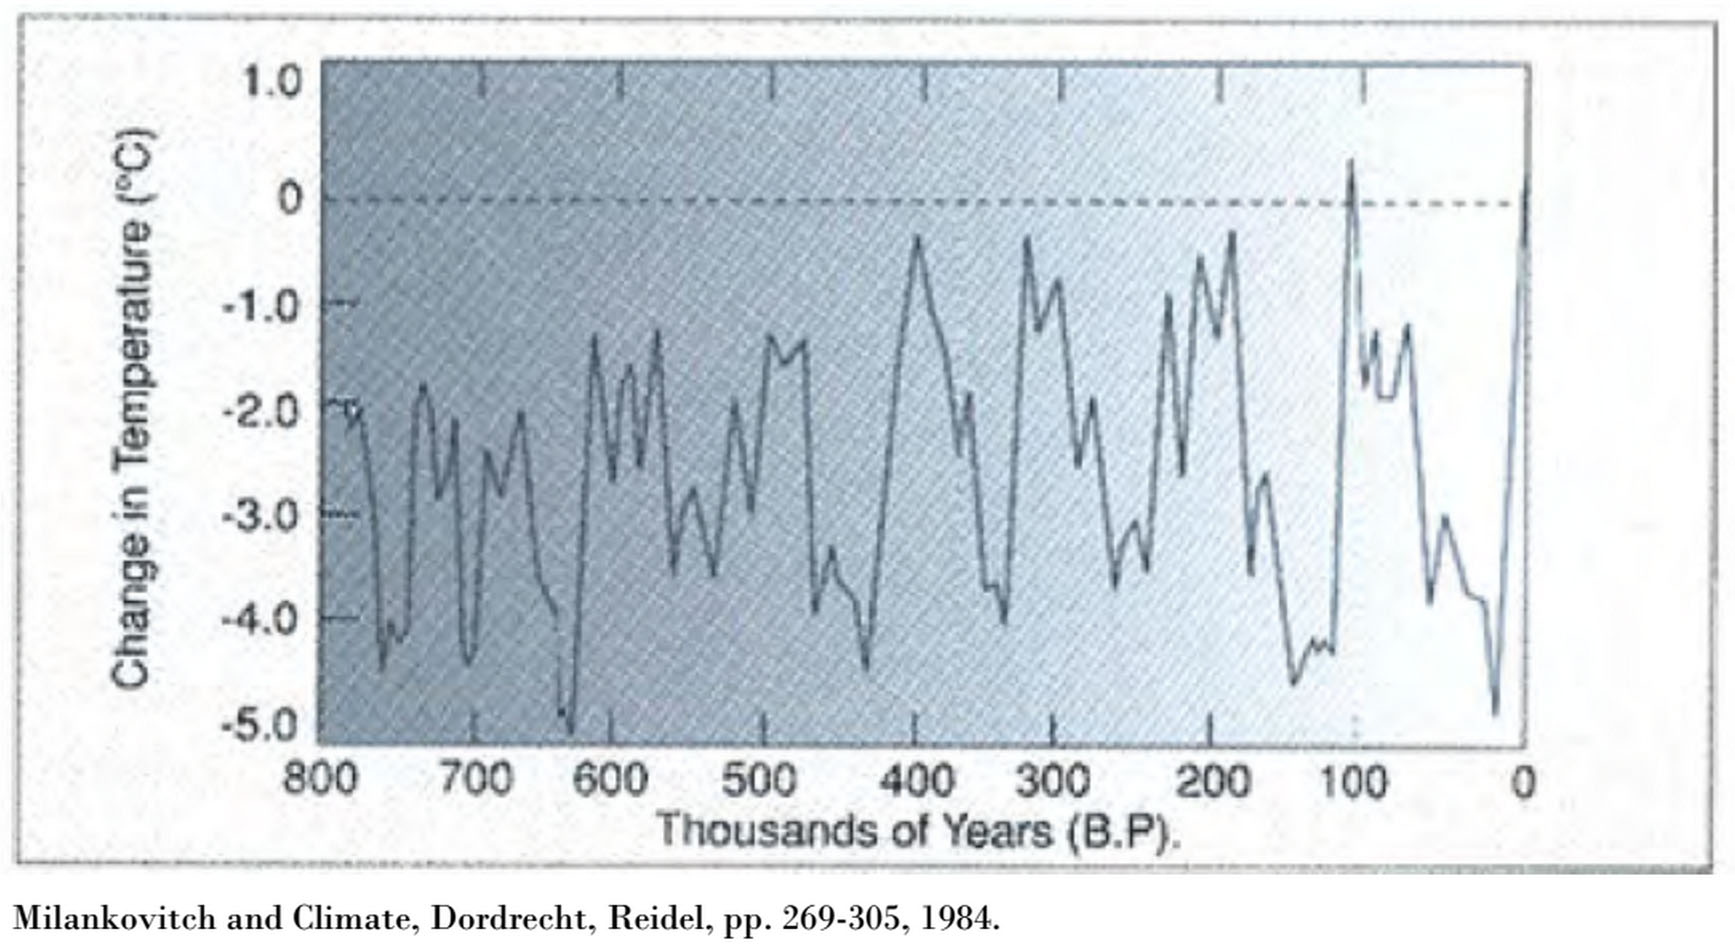 global cooling--temp swings over 1000s of years